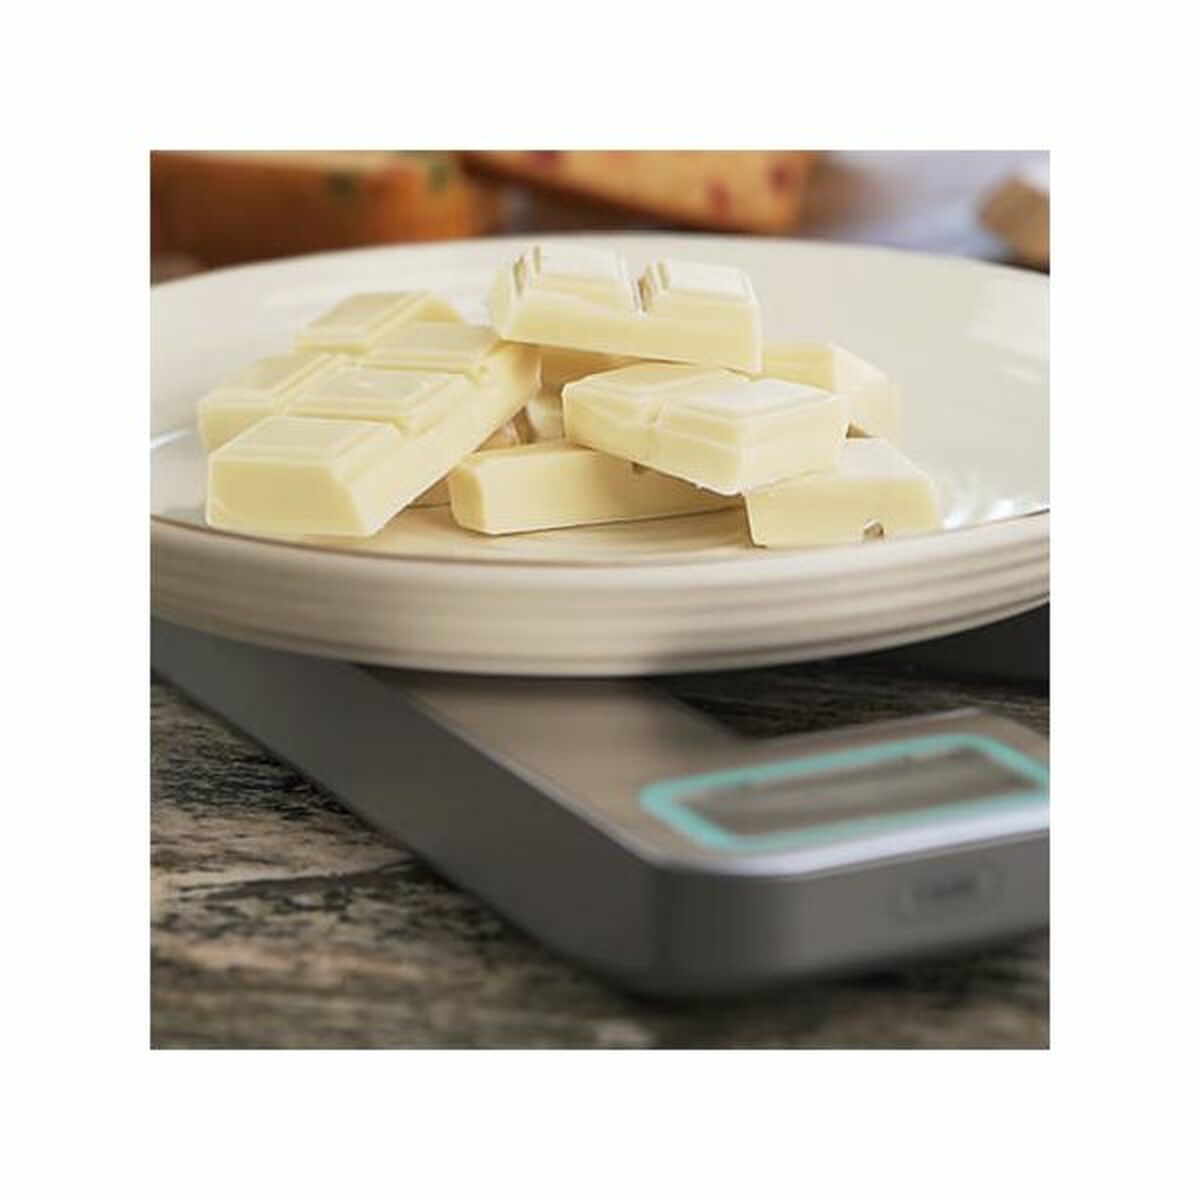 kitchen scale Cecotec Cook Control 10100 EcoPower Compact LCD 5 Kg Grey